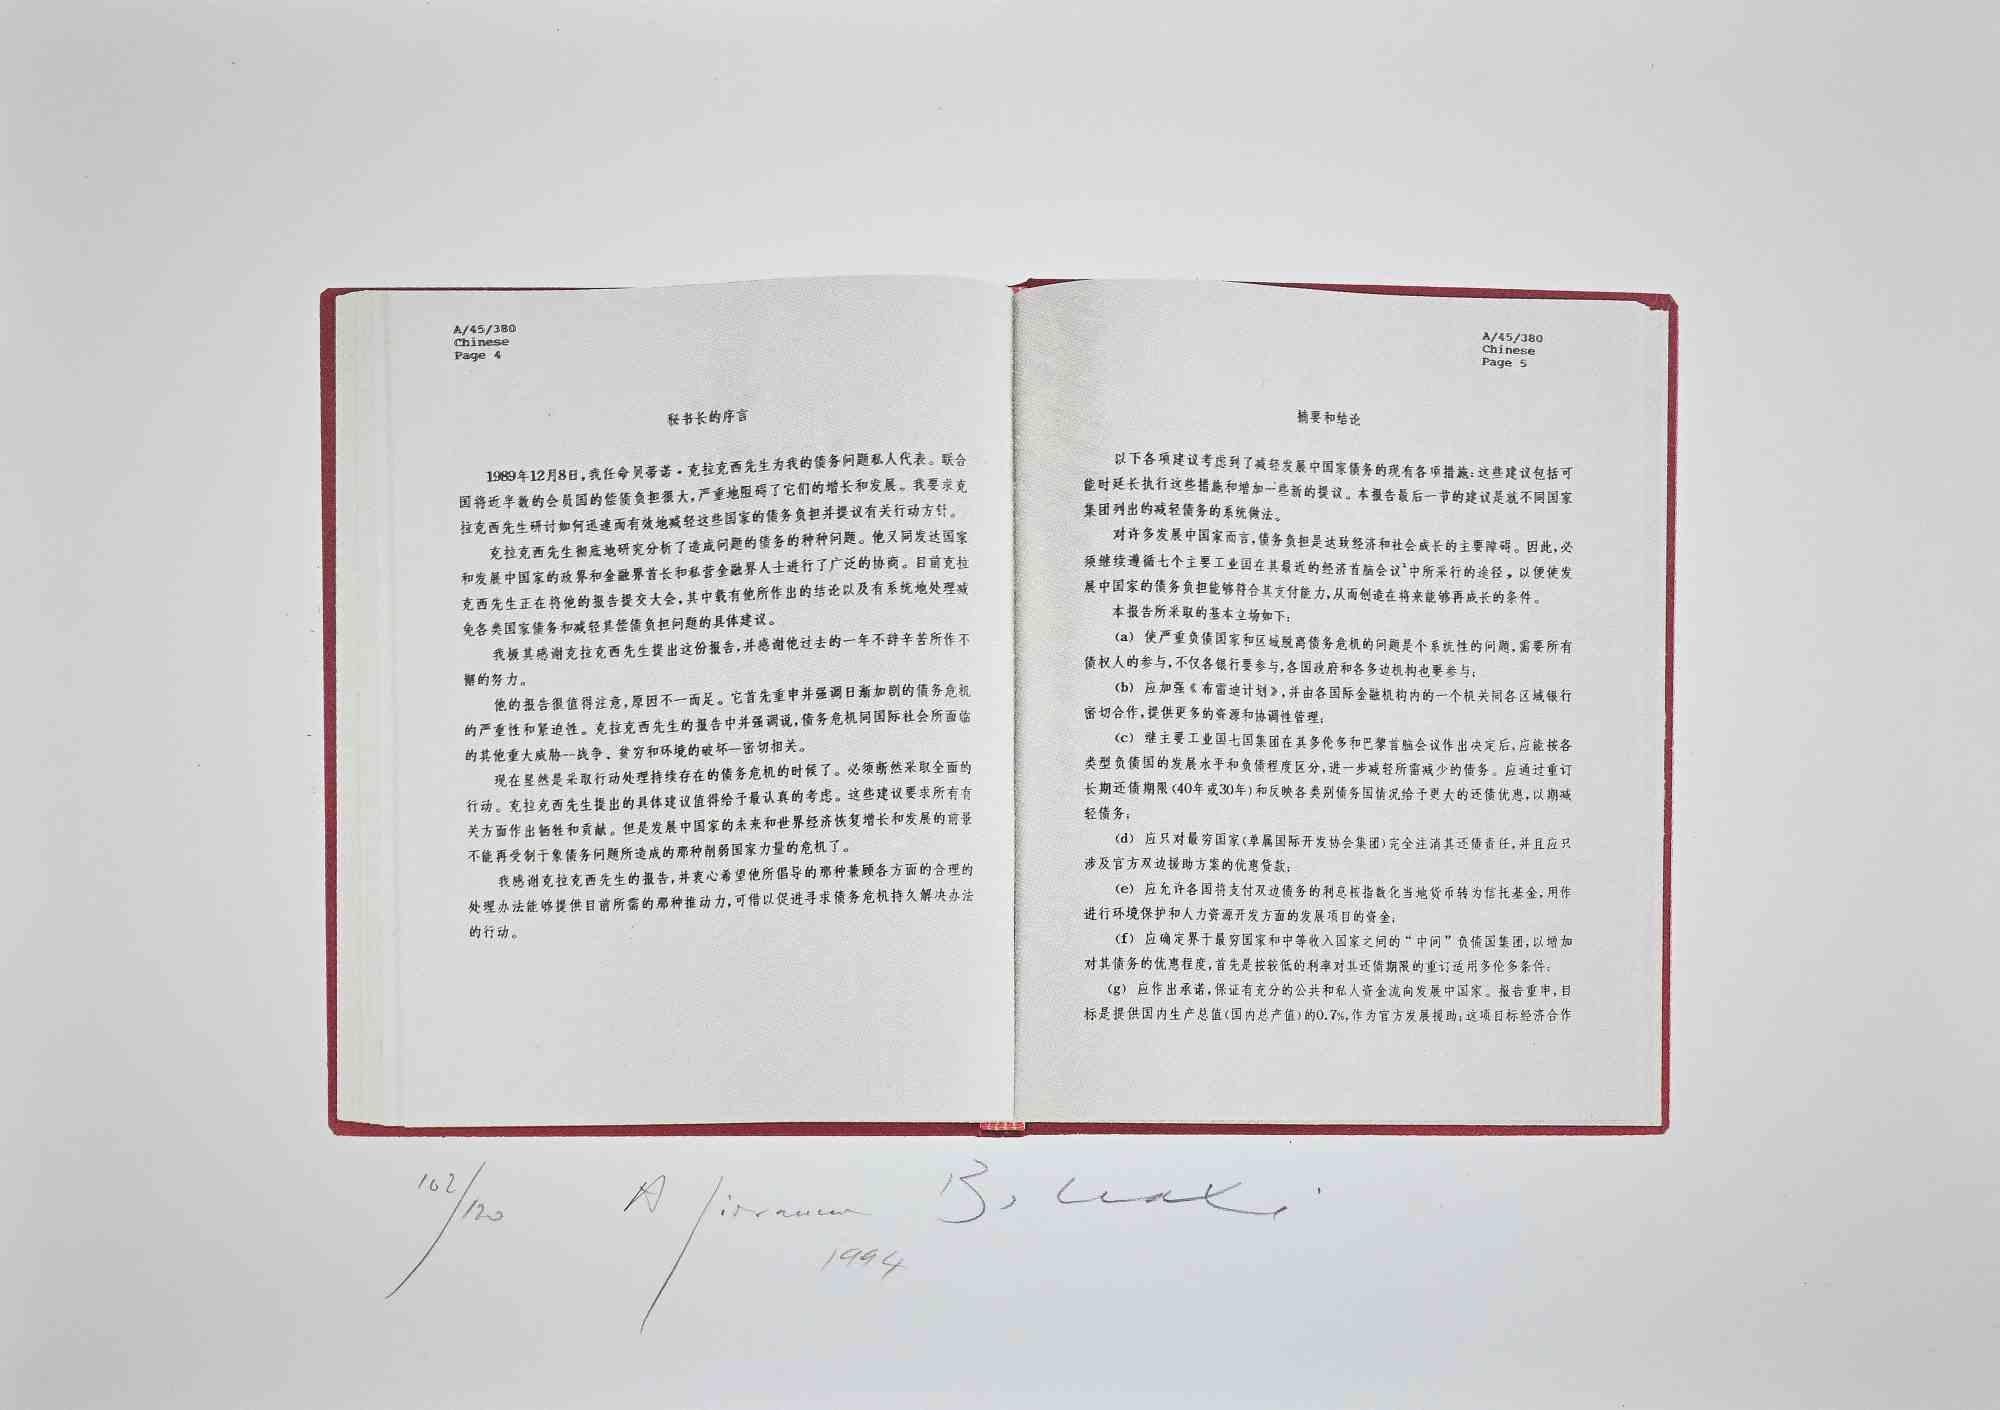 Edition of 150 specimens of which 120 samples numbered from 1 to 120, and the other 30 samples are numbered from i to xxx. (102/120)

Published in the portfolio "In the World", Ed. Serigraph, 1994.

Hand-Signed, dated, numbered